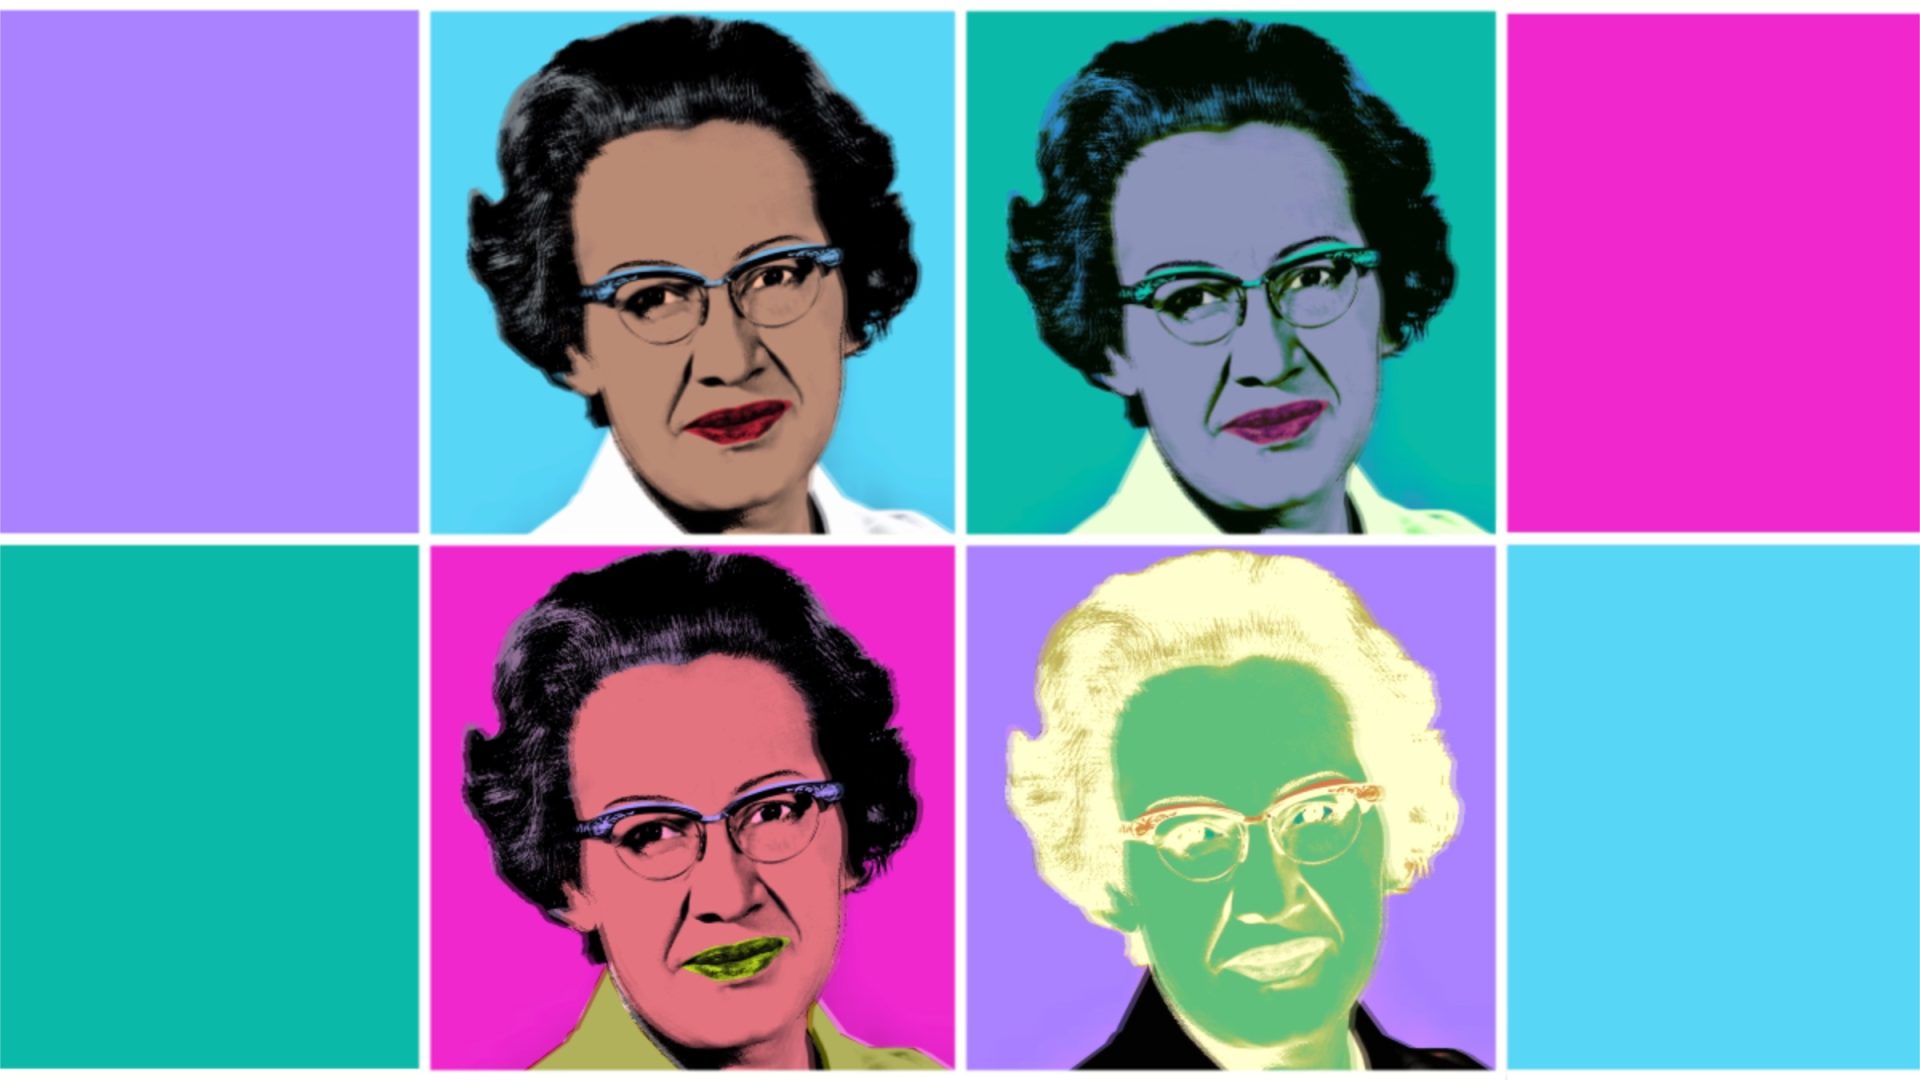 Portrait of Katherine Johnson in the style of Andy Warhol’s colorful offset prints of Marilyn Monroe.